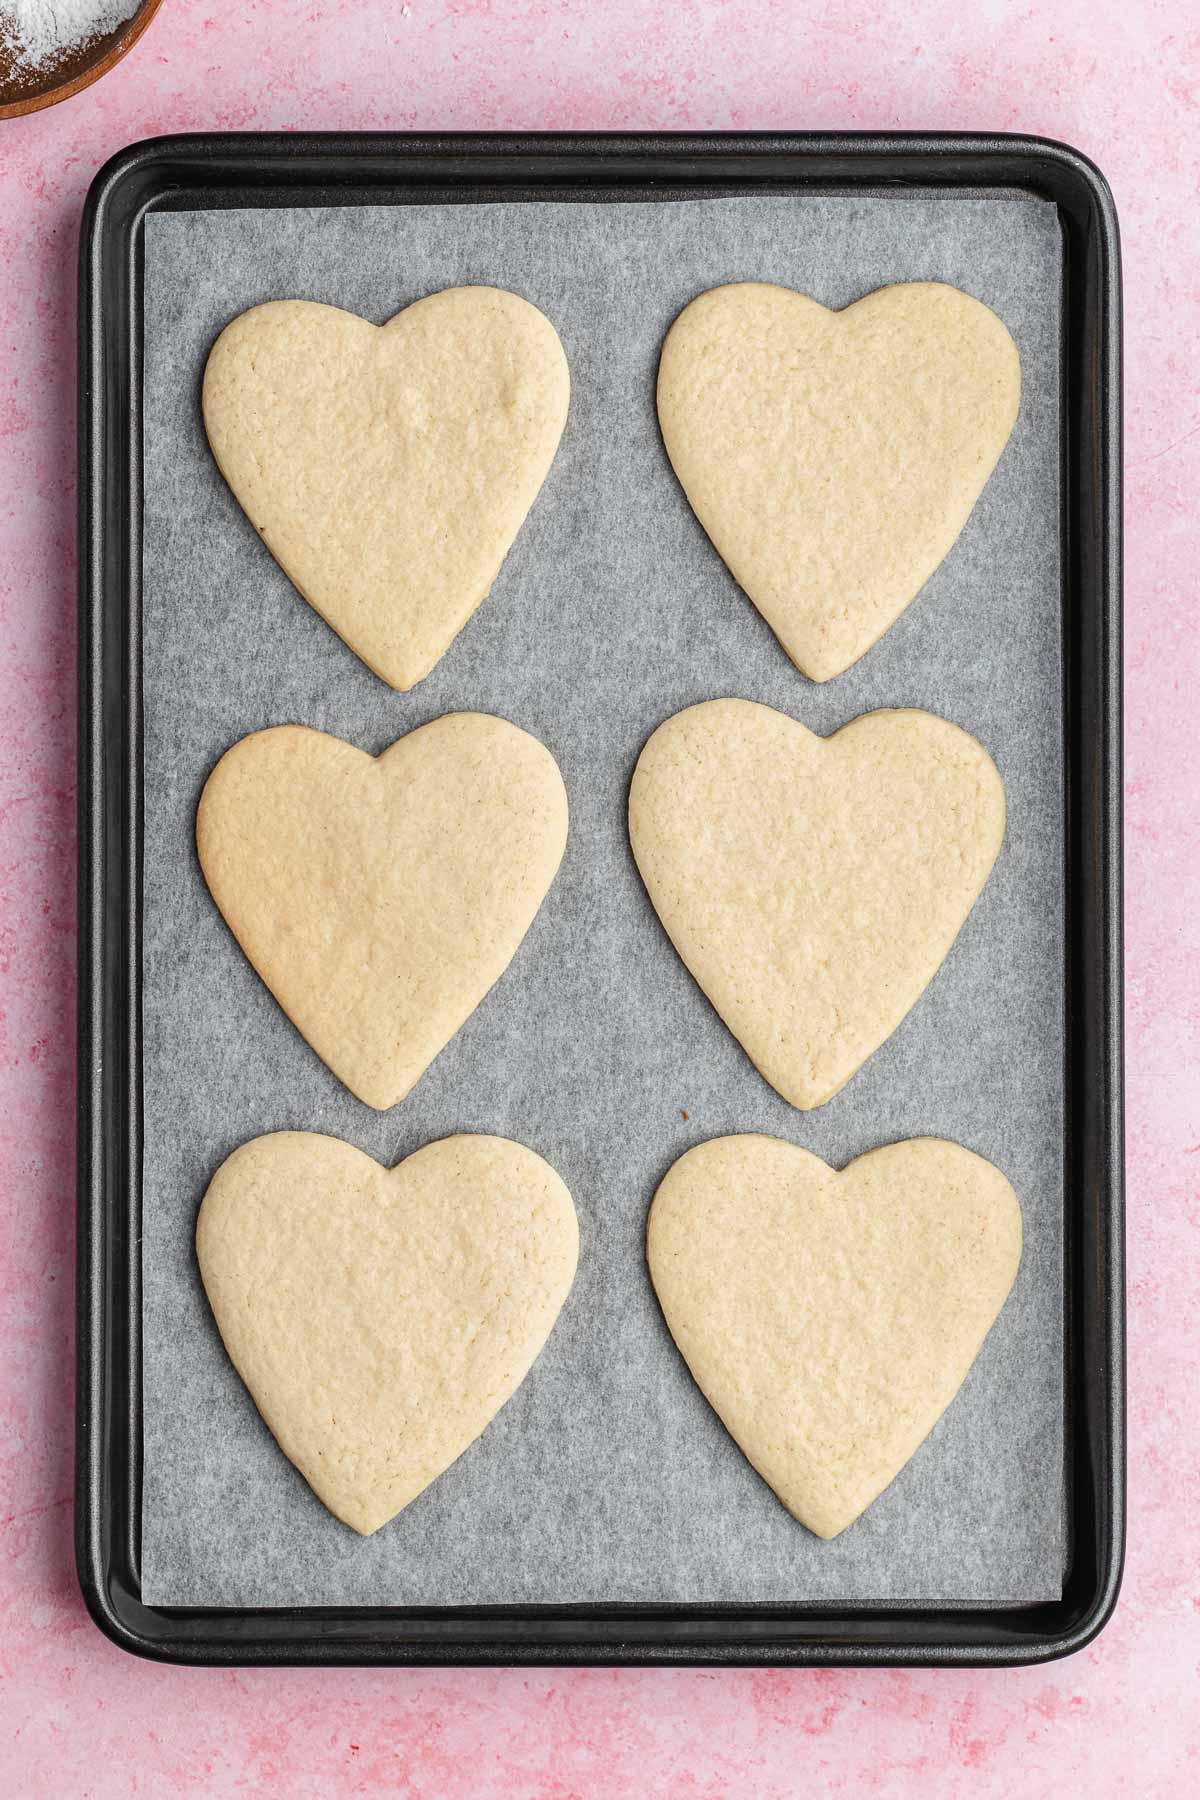 6 heart shaped cooked cookies on a baking sheet